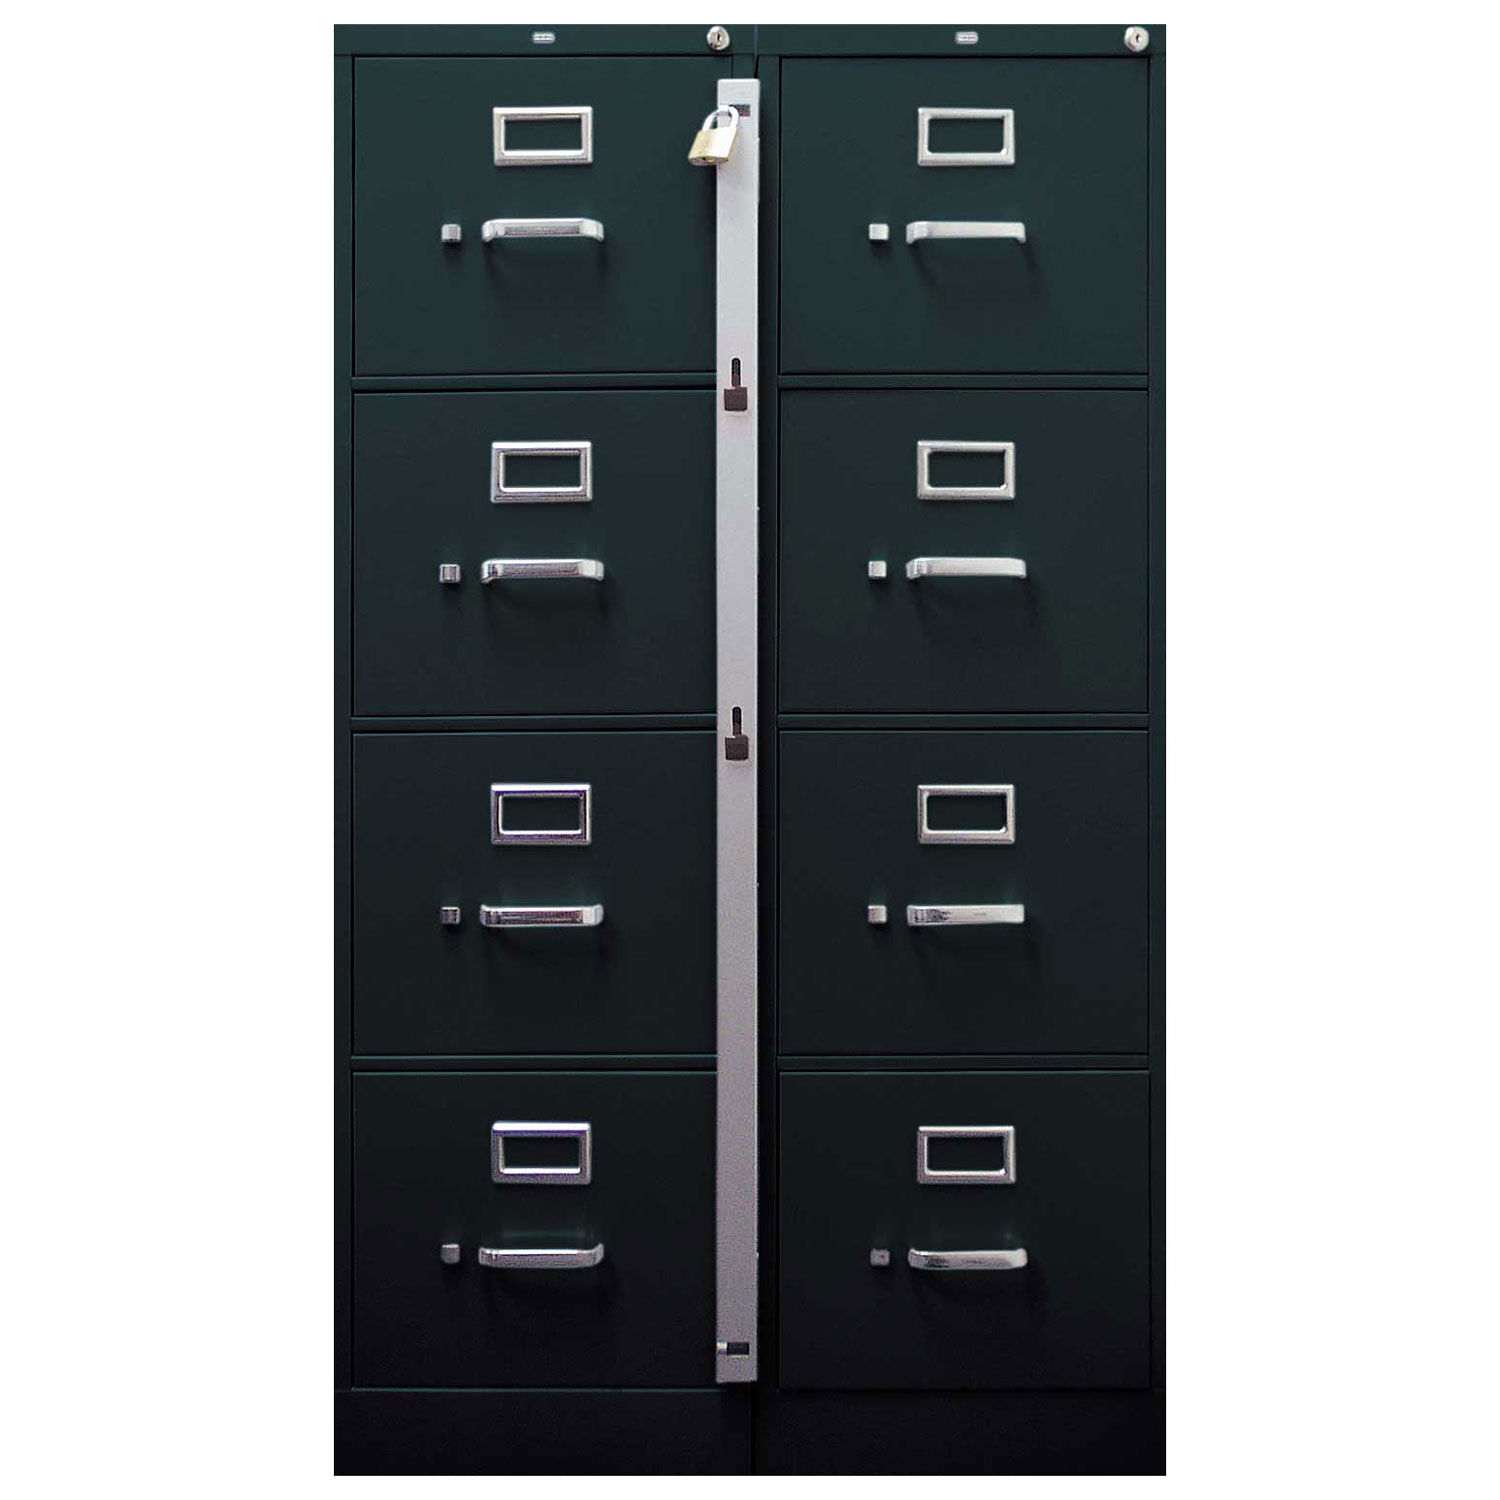 Locking Lockout Devices Locks Padlocks Abus File Cabinet within dimensions 1500 X 1500